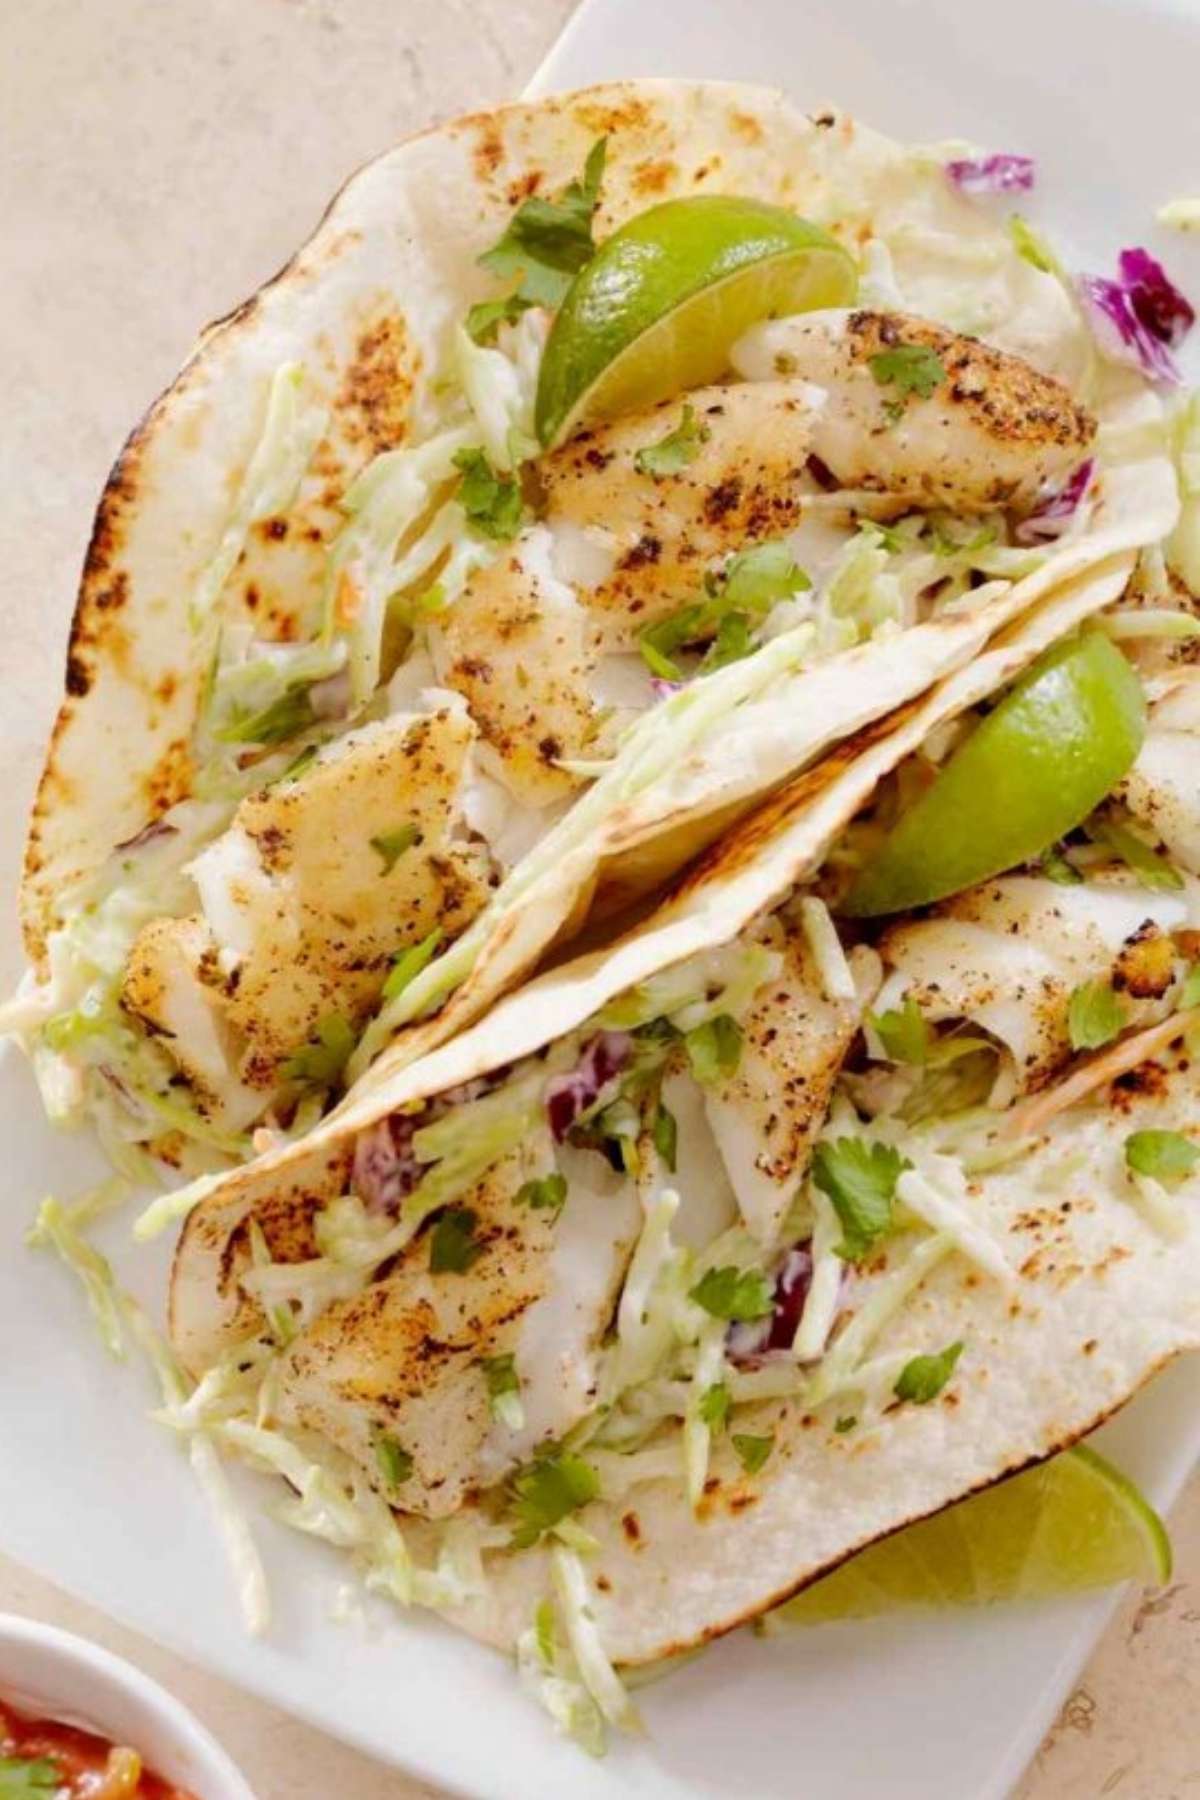 With the wide variety of fish available, as well as an increase in tortilla options, we love serving fish tacos for our families. If you love fish tacos as much as we do, you’ll appreciate this list of 18 of the Best Side Dishes for Fish Tacos. Let’s get started!